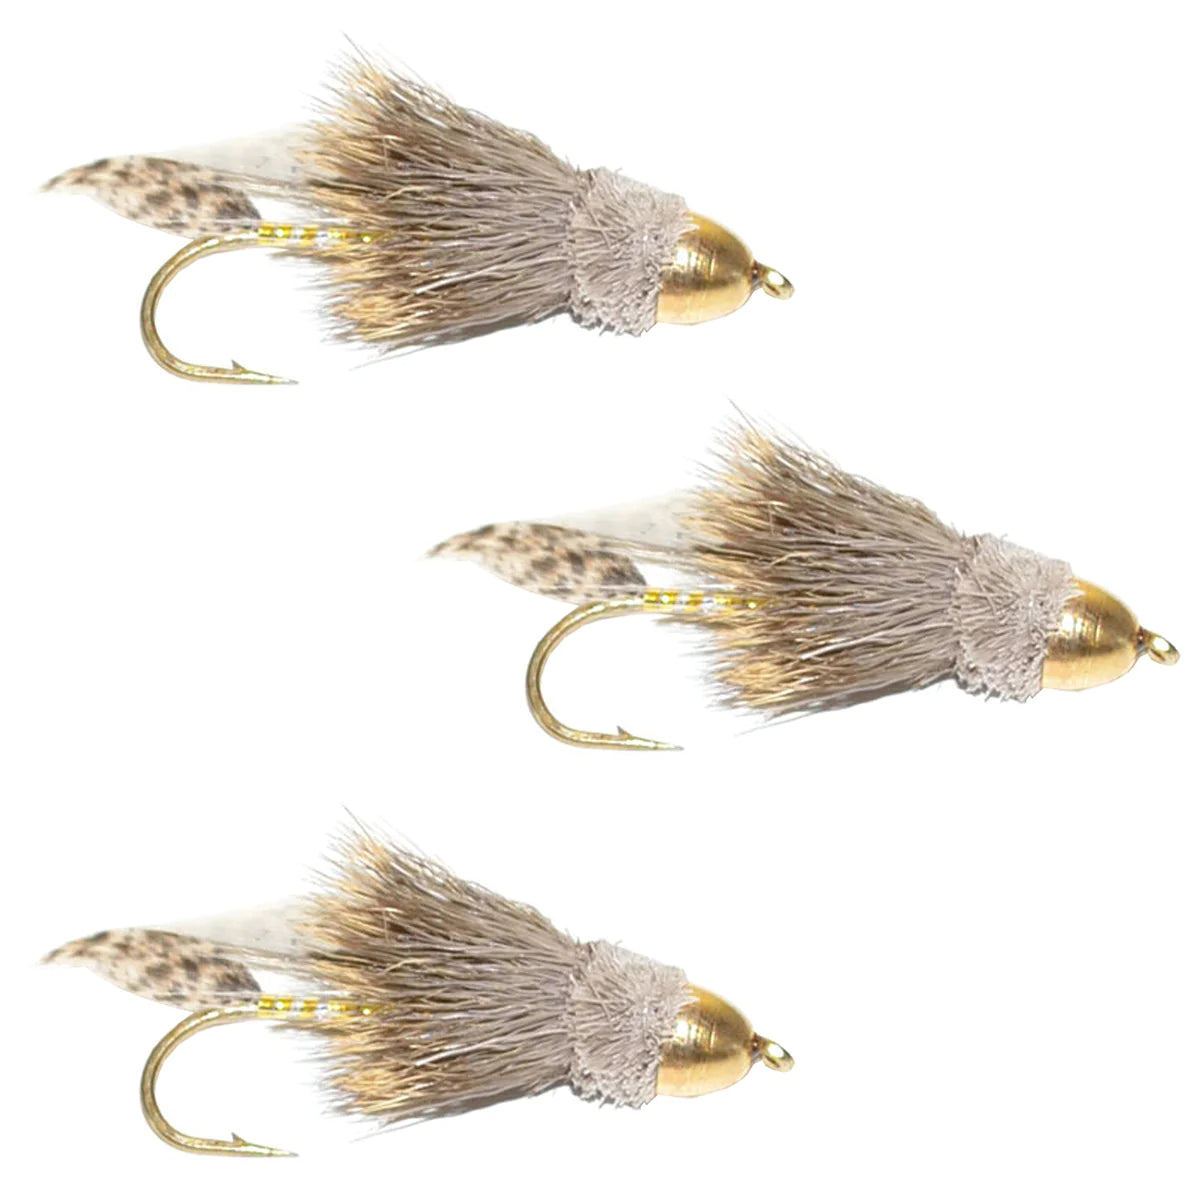 3 Pack Cone Head Muddler Minnow Trout and Bass Streamer Fly - Hook Size 4